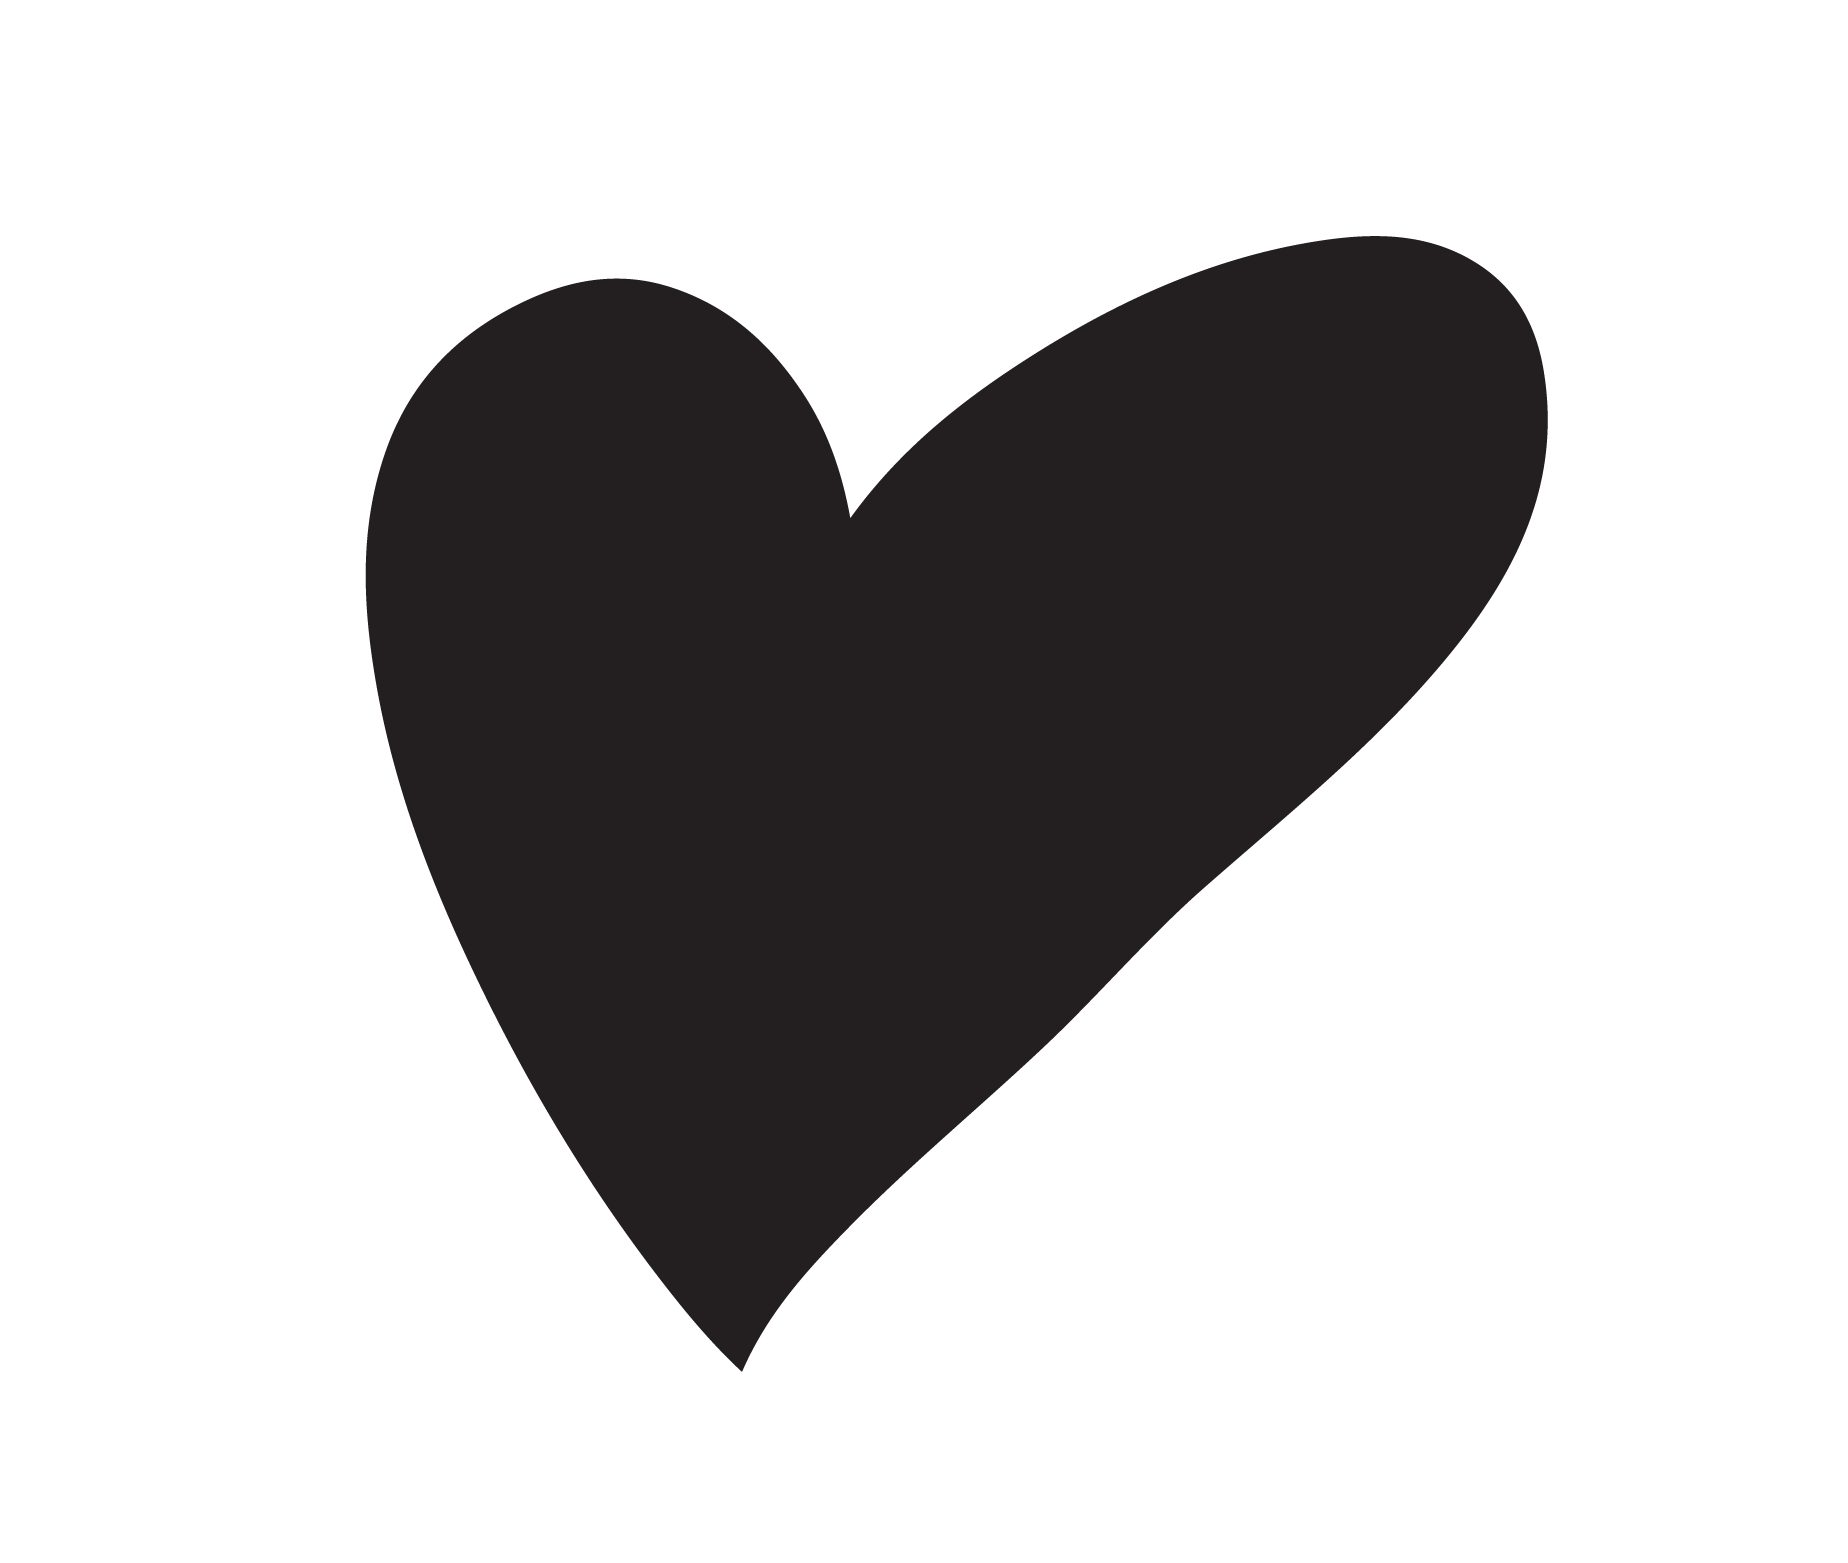 Heart Drawing - Hand drawn heart-shaped vector png download - 1848*1563